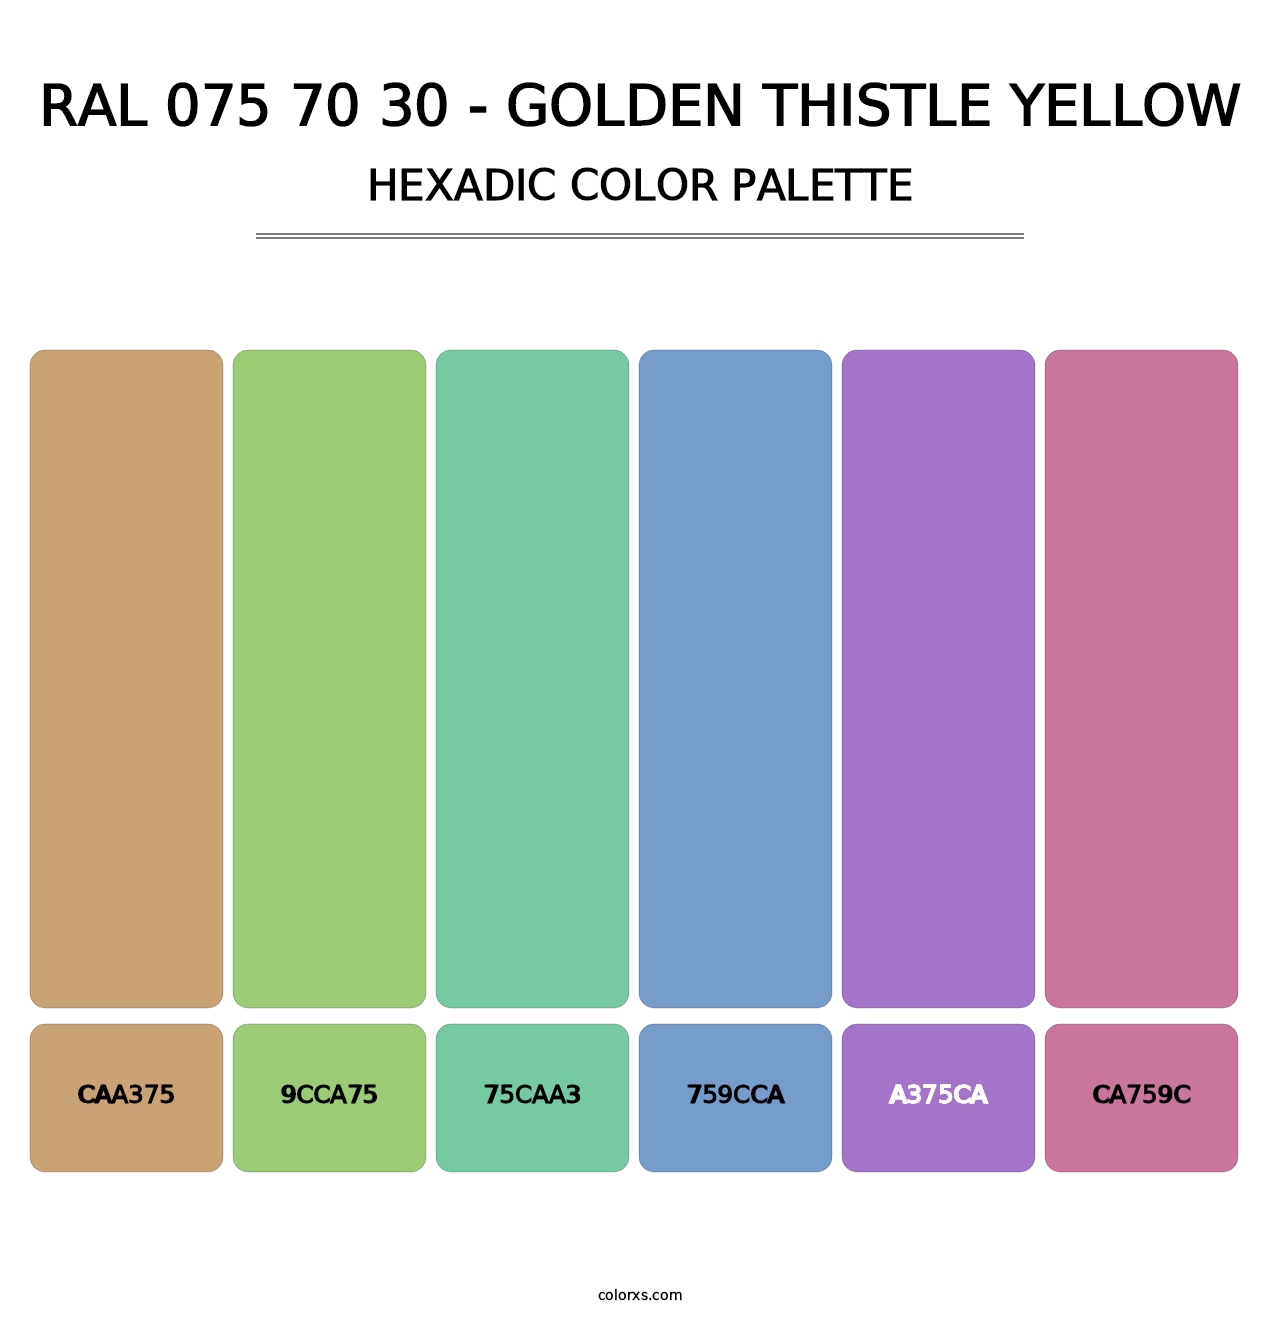 RAL 075 70 30 - Golden Thistle Yellow - Hexadic Color Palette